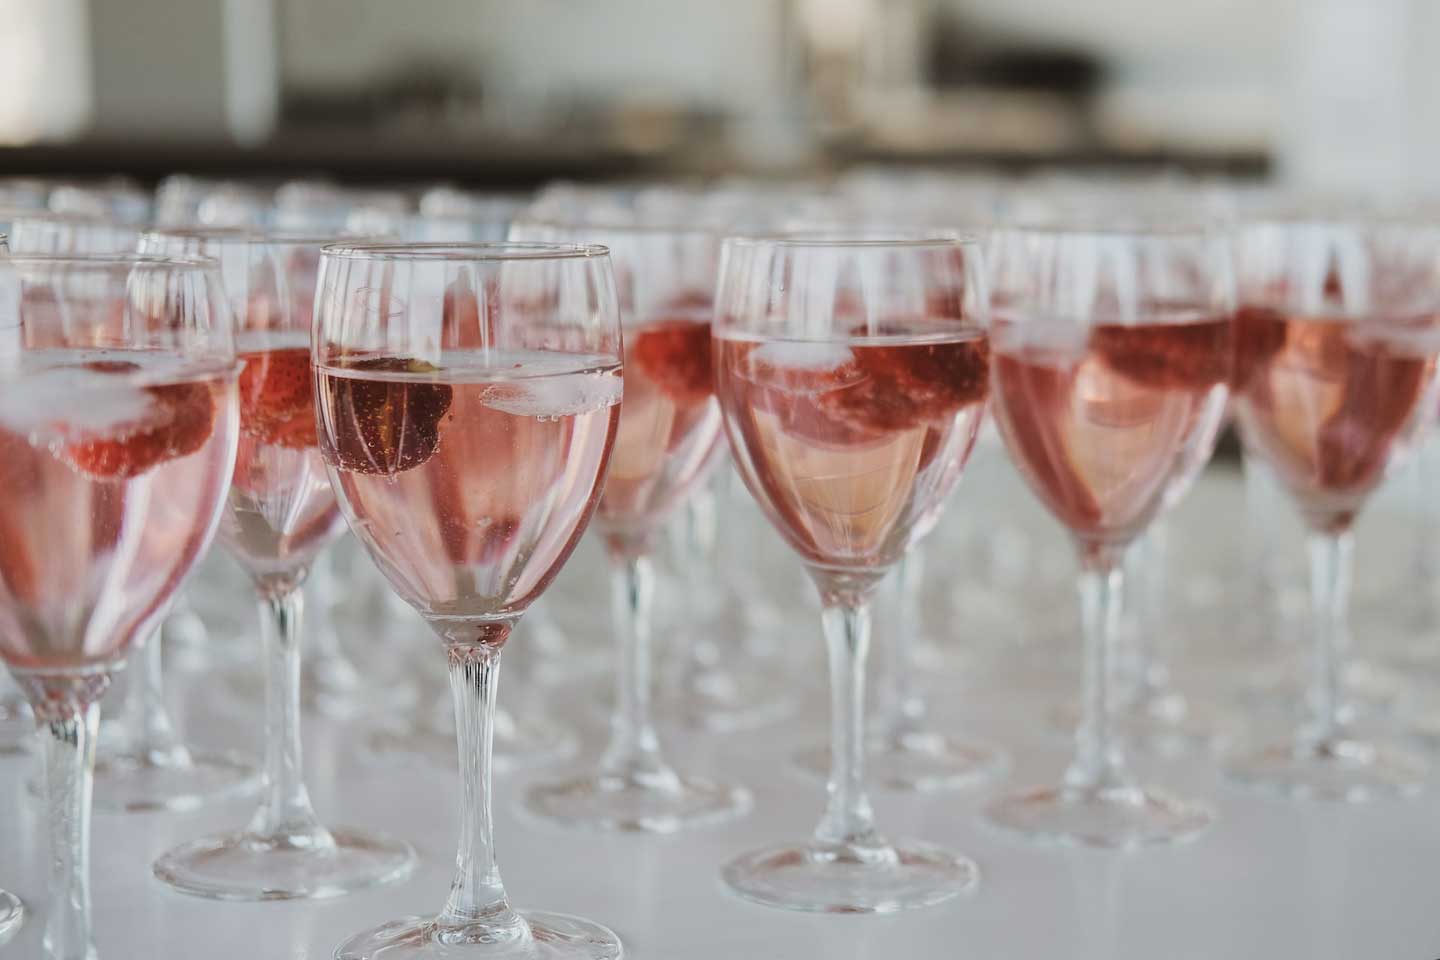 Airy and bright lighting with rows of Wine Glasses filled with pale pink colored wine.